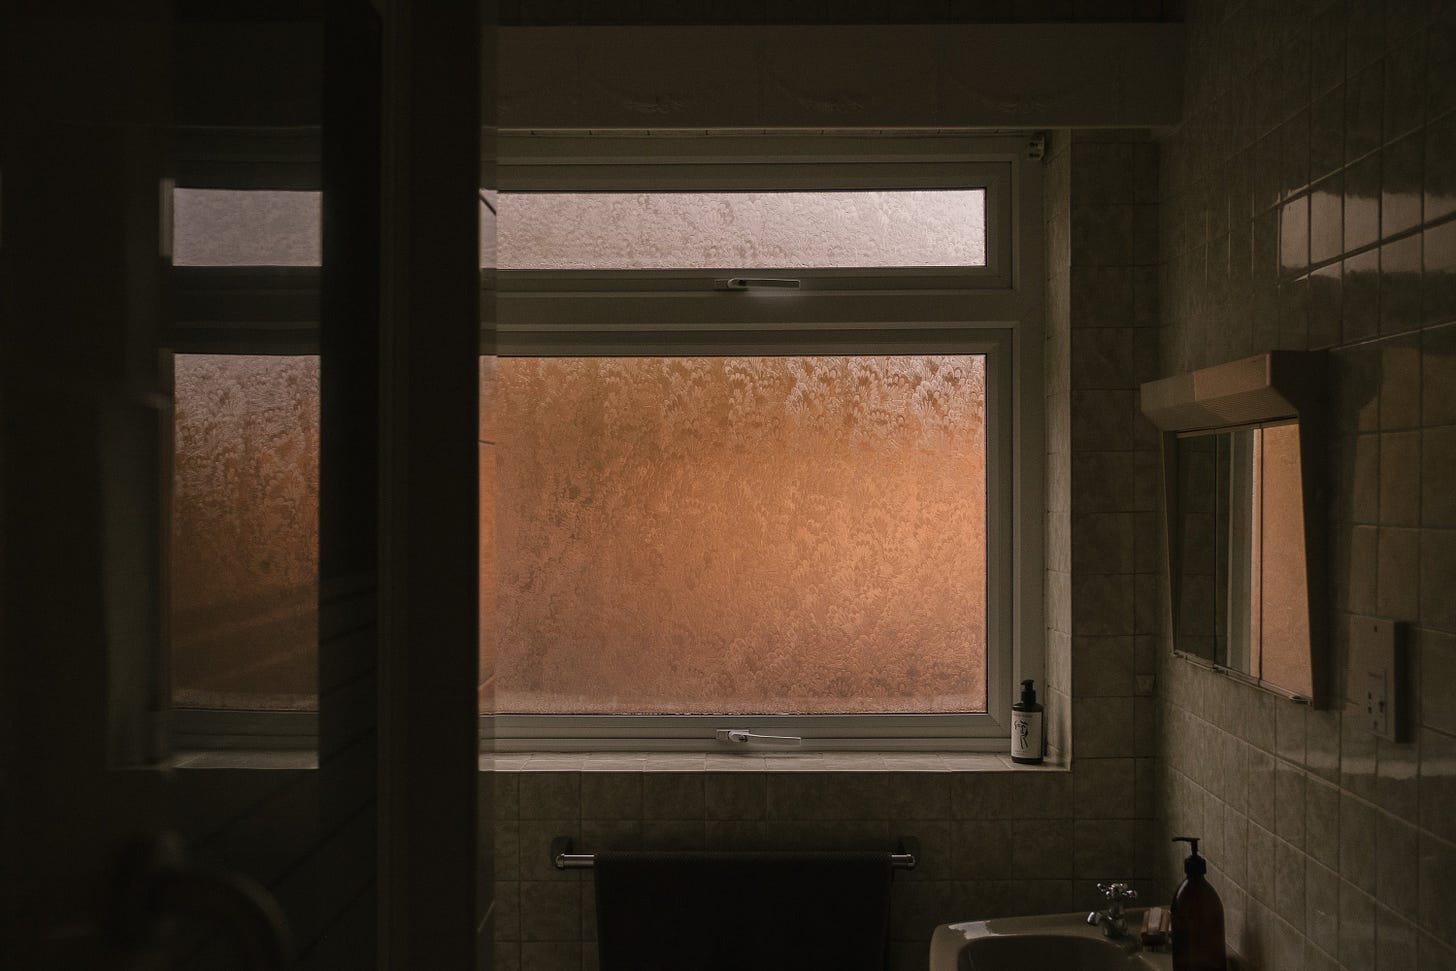 Looking into a bathroom towards the window in the glowing amber of early morning.